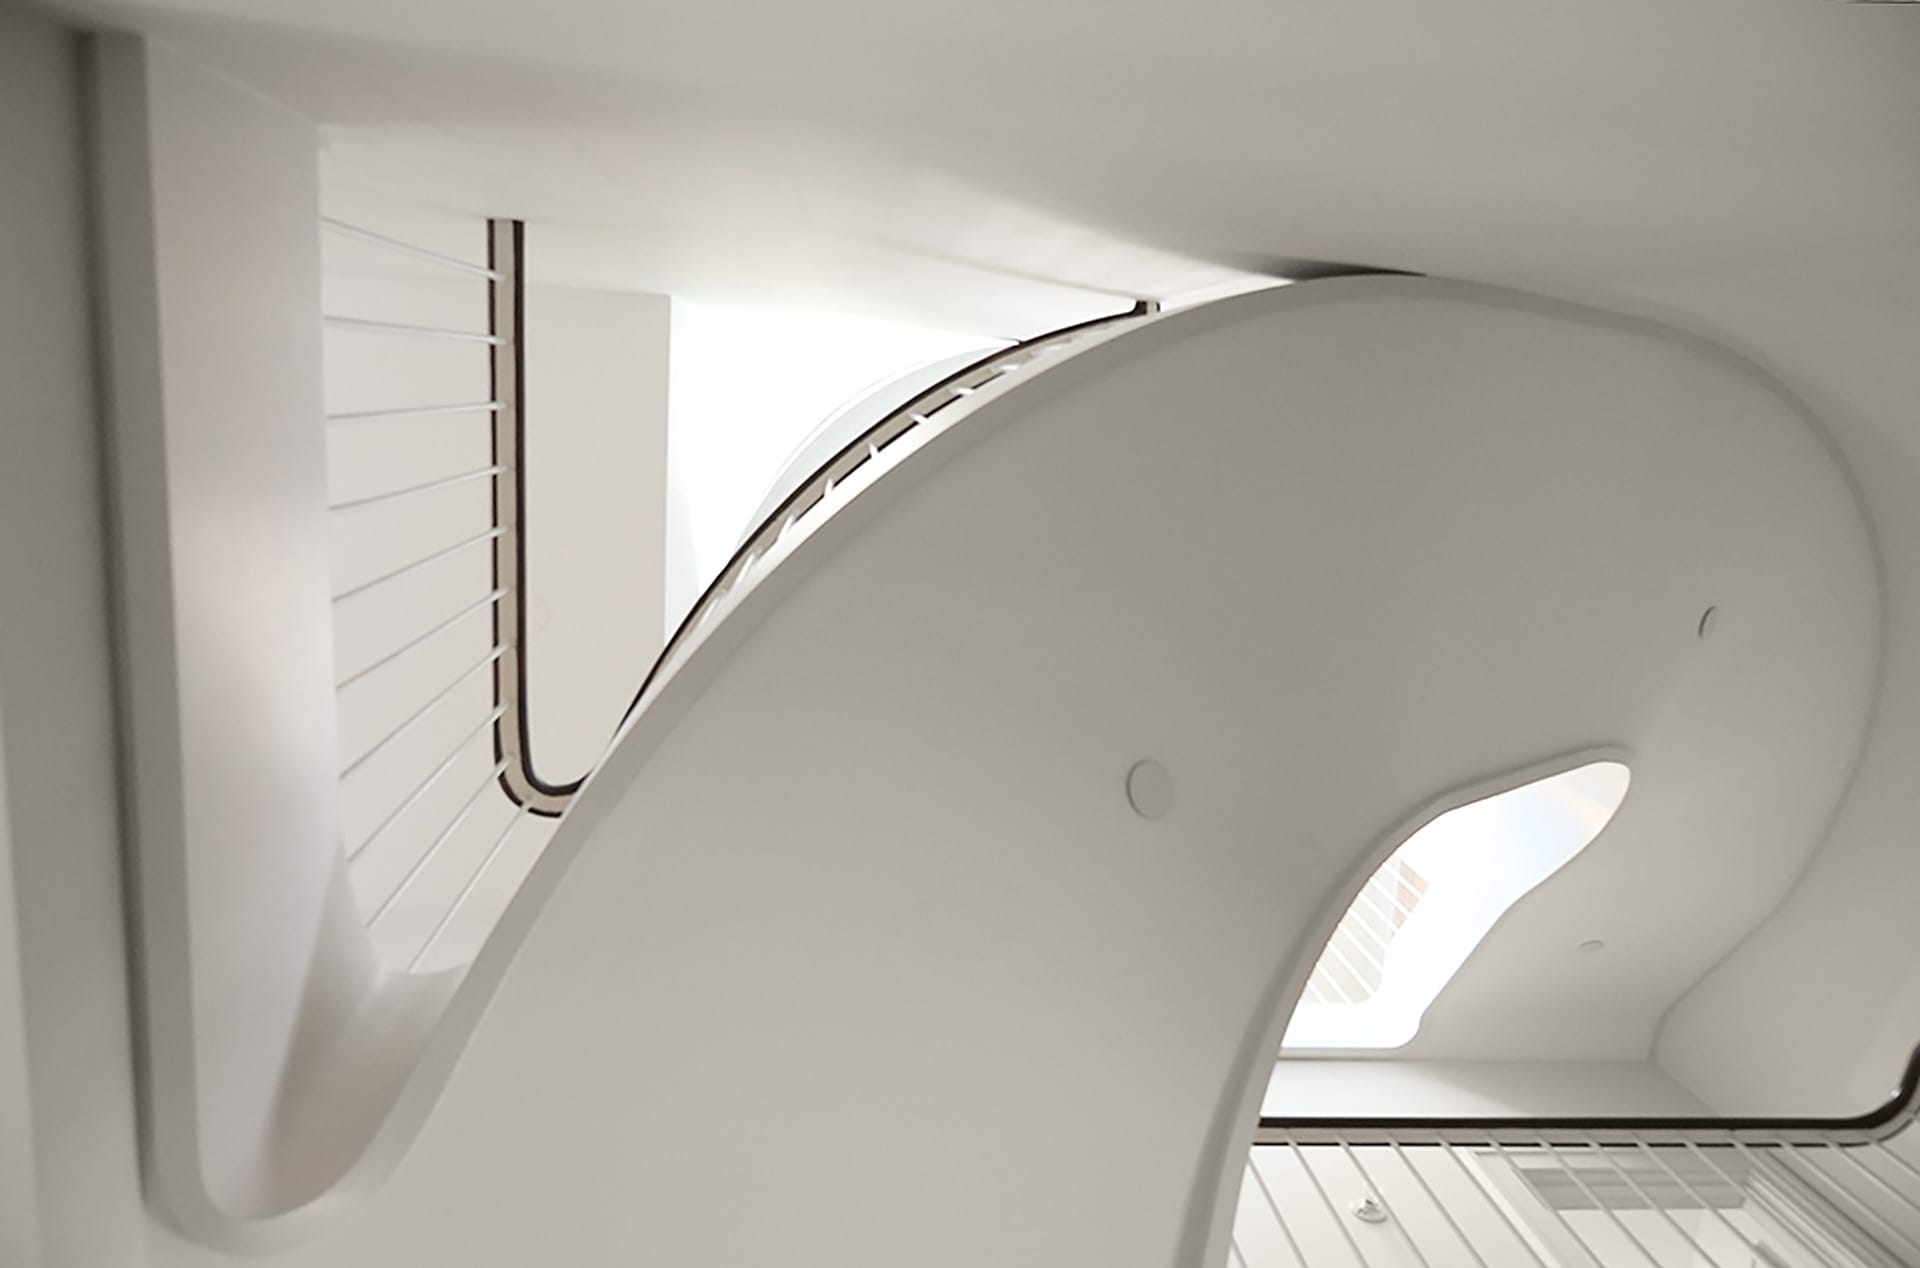 Detail shot of a sculptural white staircase, looking up from below